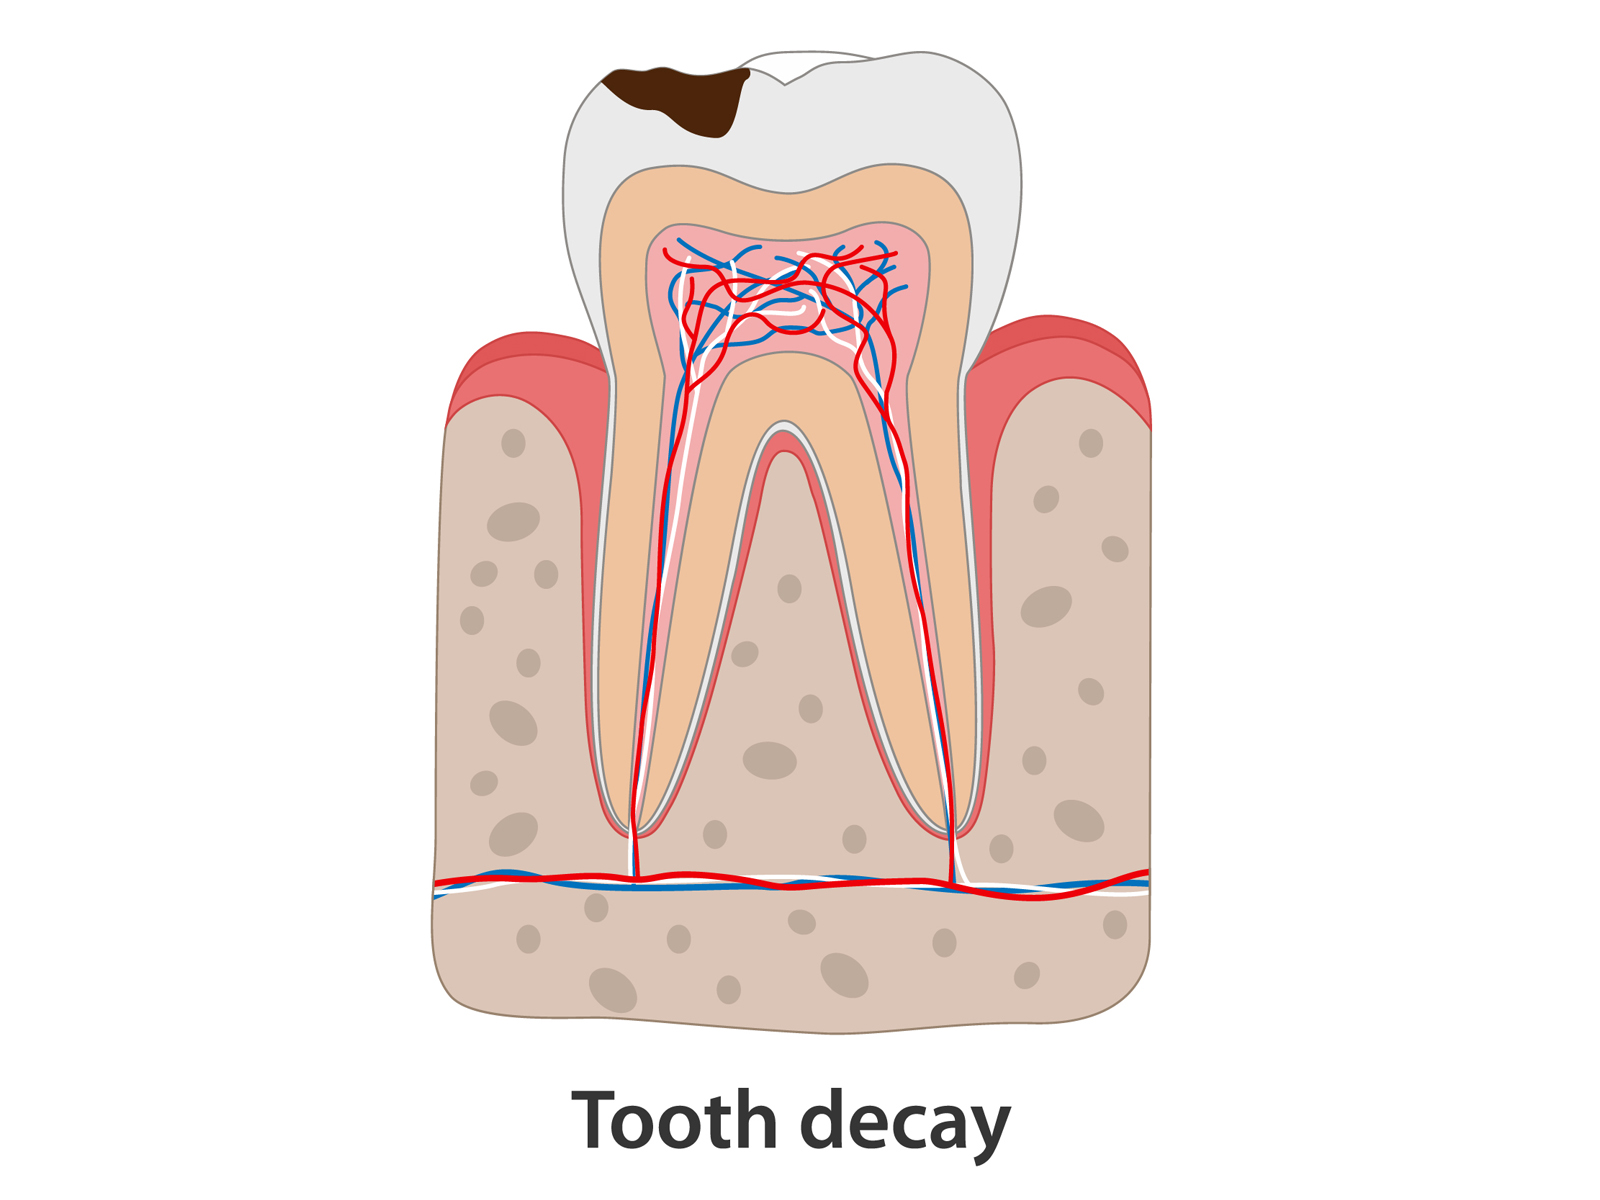 Common Diseases That Cause Tooth Decay